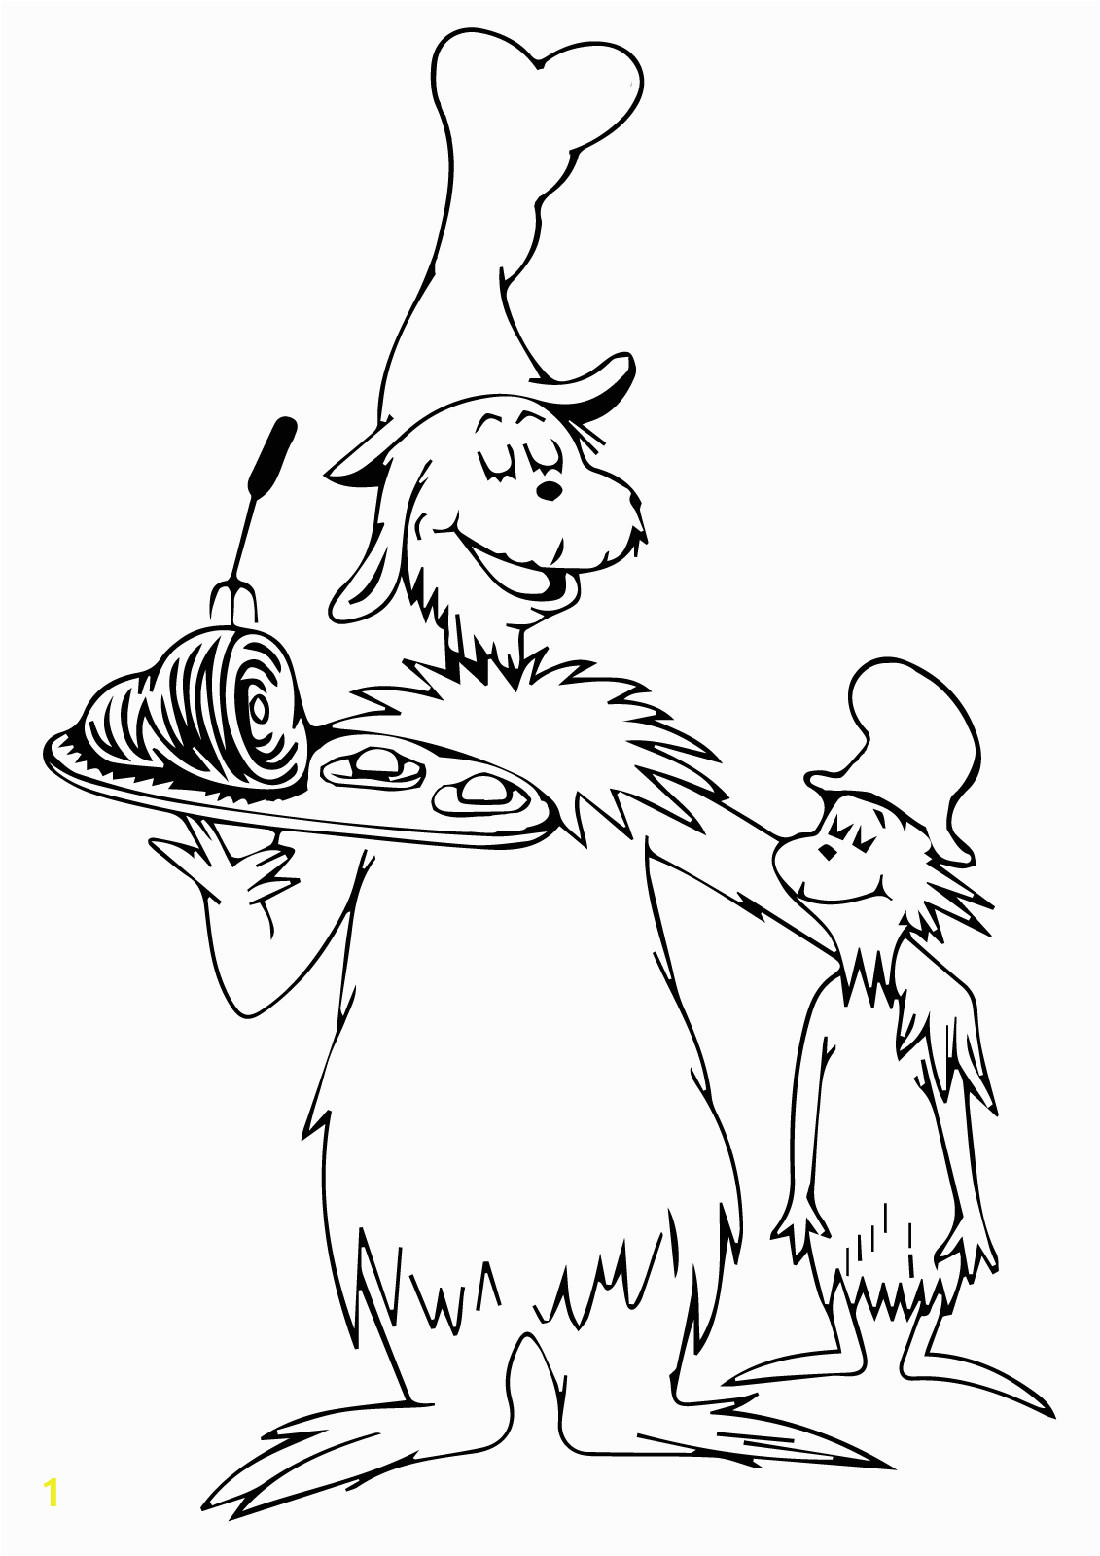 Green Eggs and Ham Coloring Pages Green Eggs and Ham Coloring Pages Various Episodes